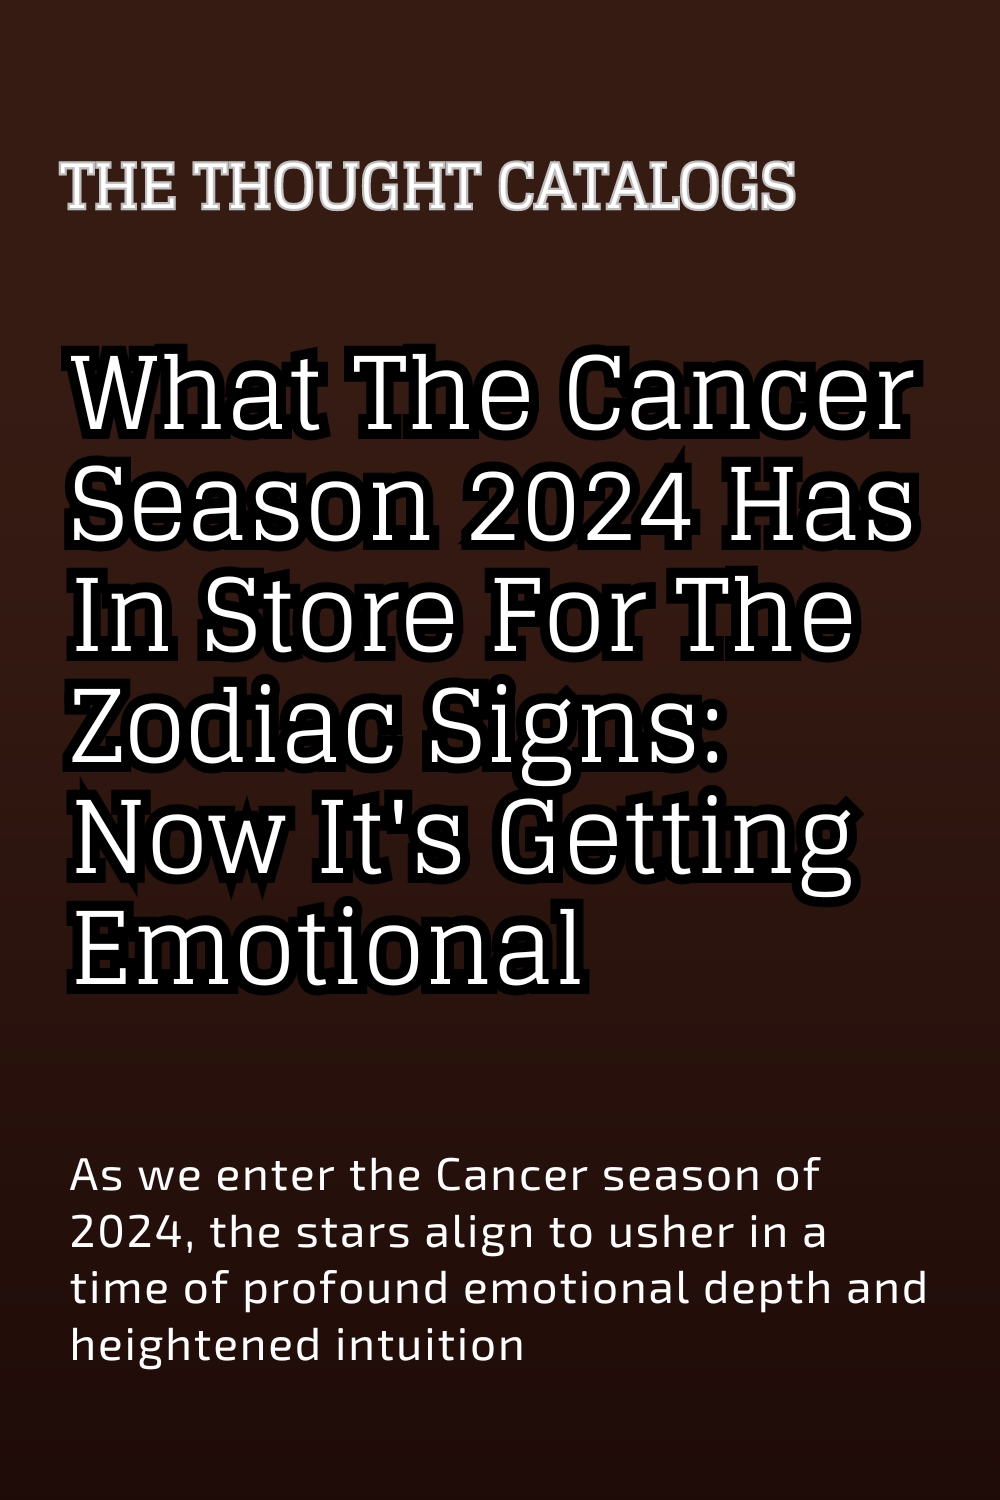 What The Cancer Season 2024 Has In Store For The Zodiac Signs Now It's Getting Emotional